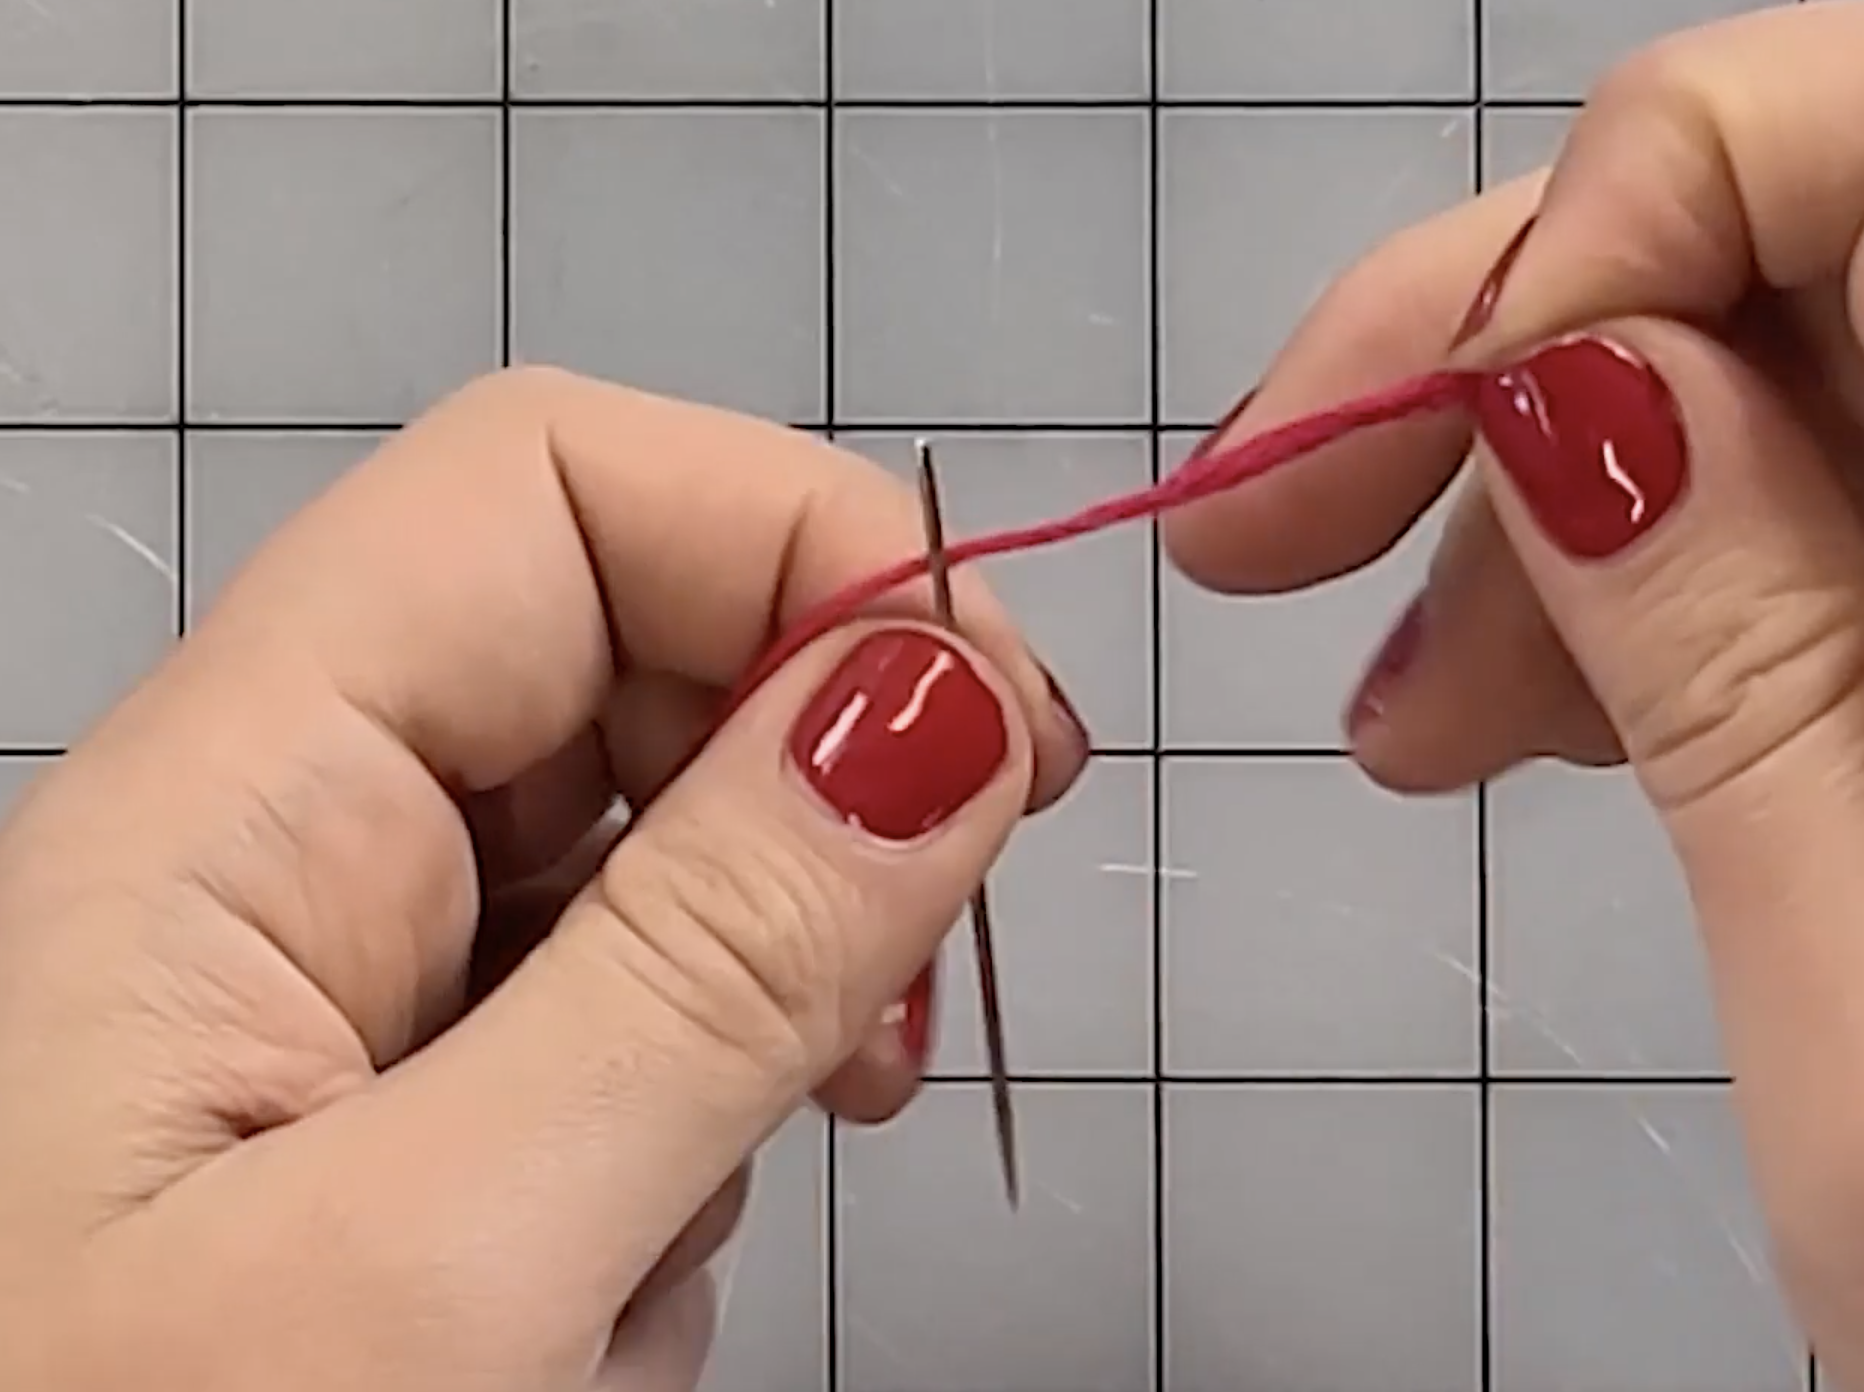 How to Put Thread in a Needle Easily l DIY Ways to Make a Needle